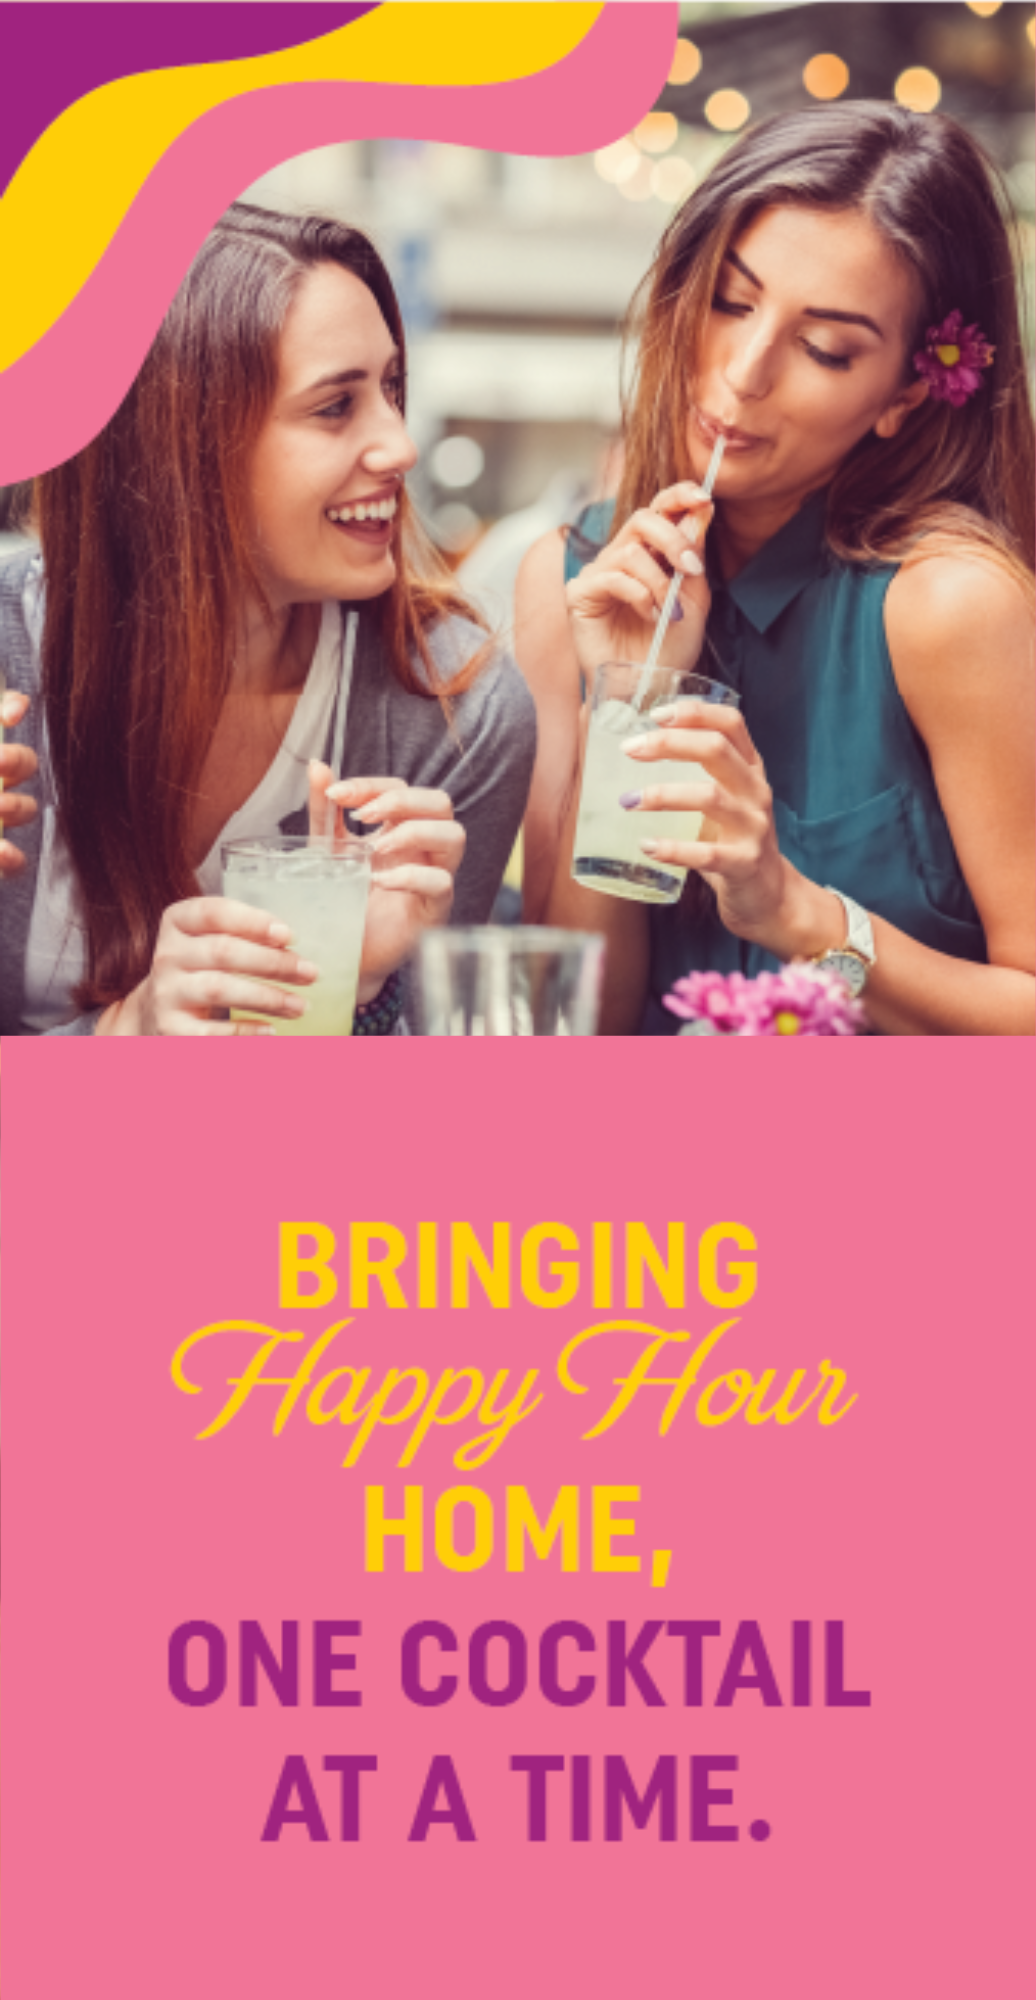 Bringing Happy Hour home one cocktail at a time